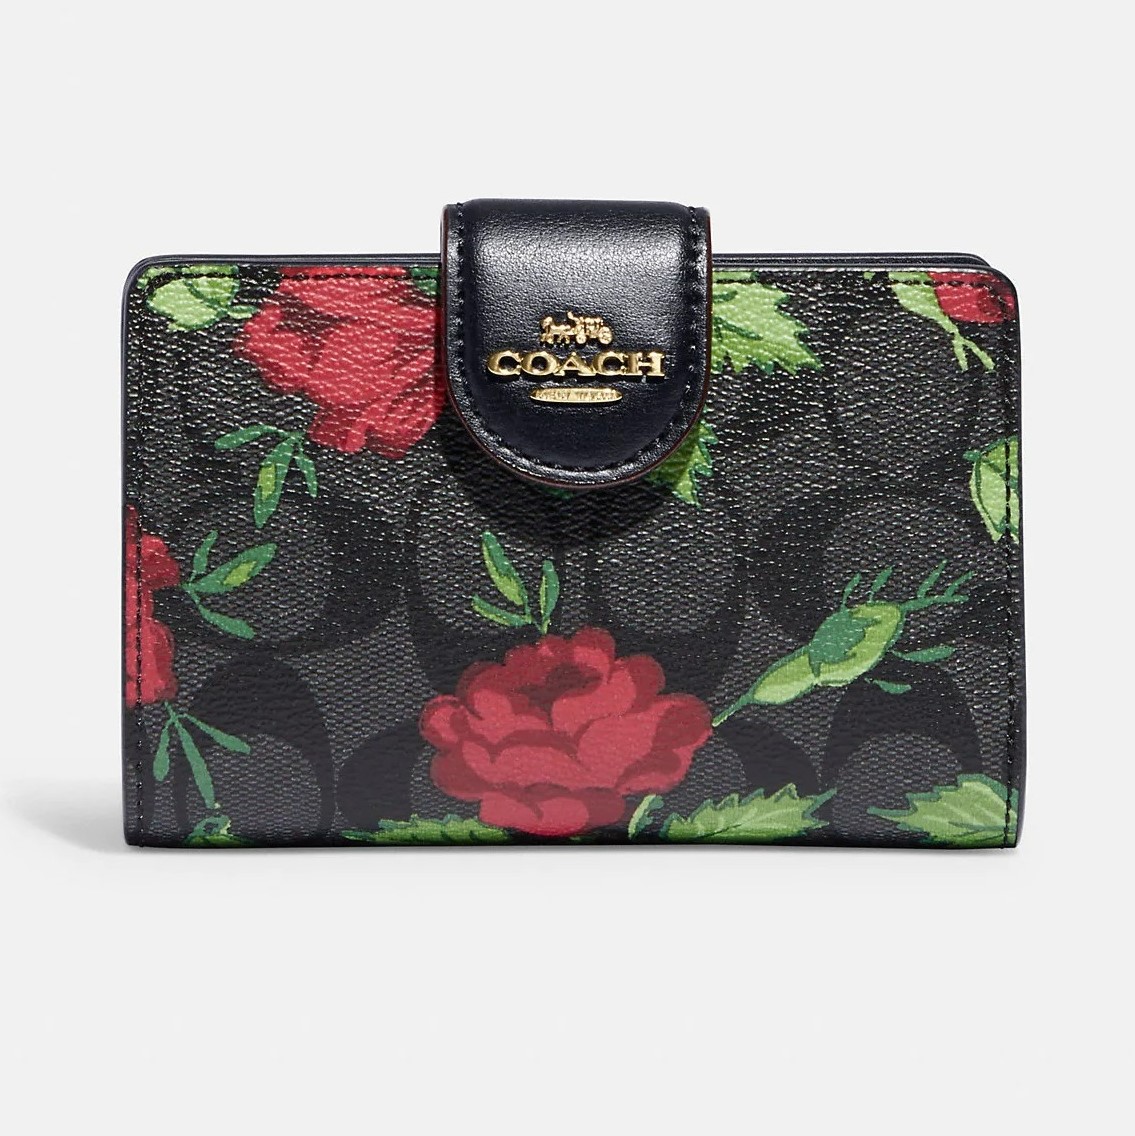 VÍ COACH MEDIUM CORNER ZIP WALLET IN SIGNATURE CANVAS WITH FAIRYTALE ROSE PRINT 2